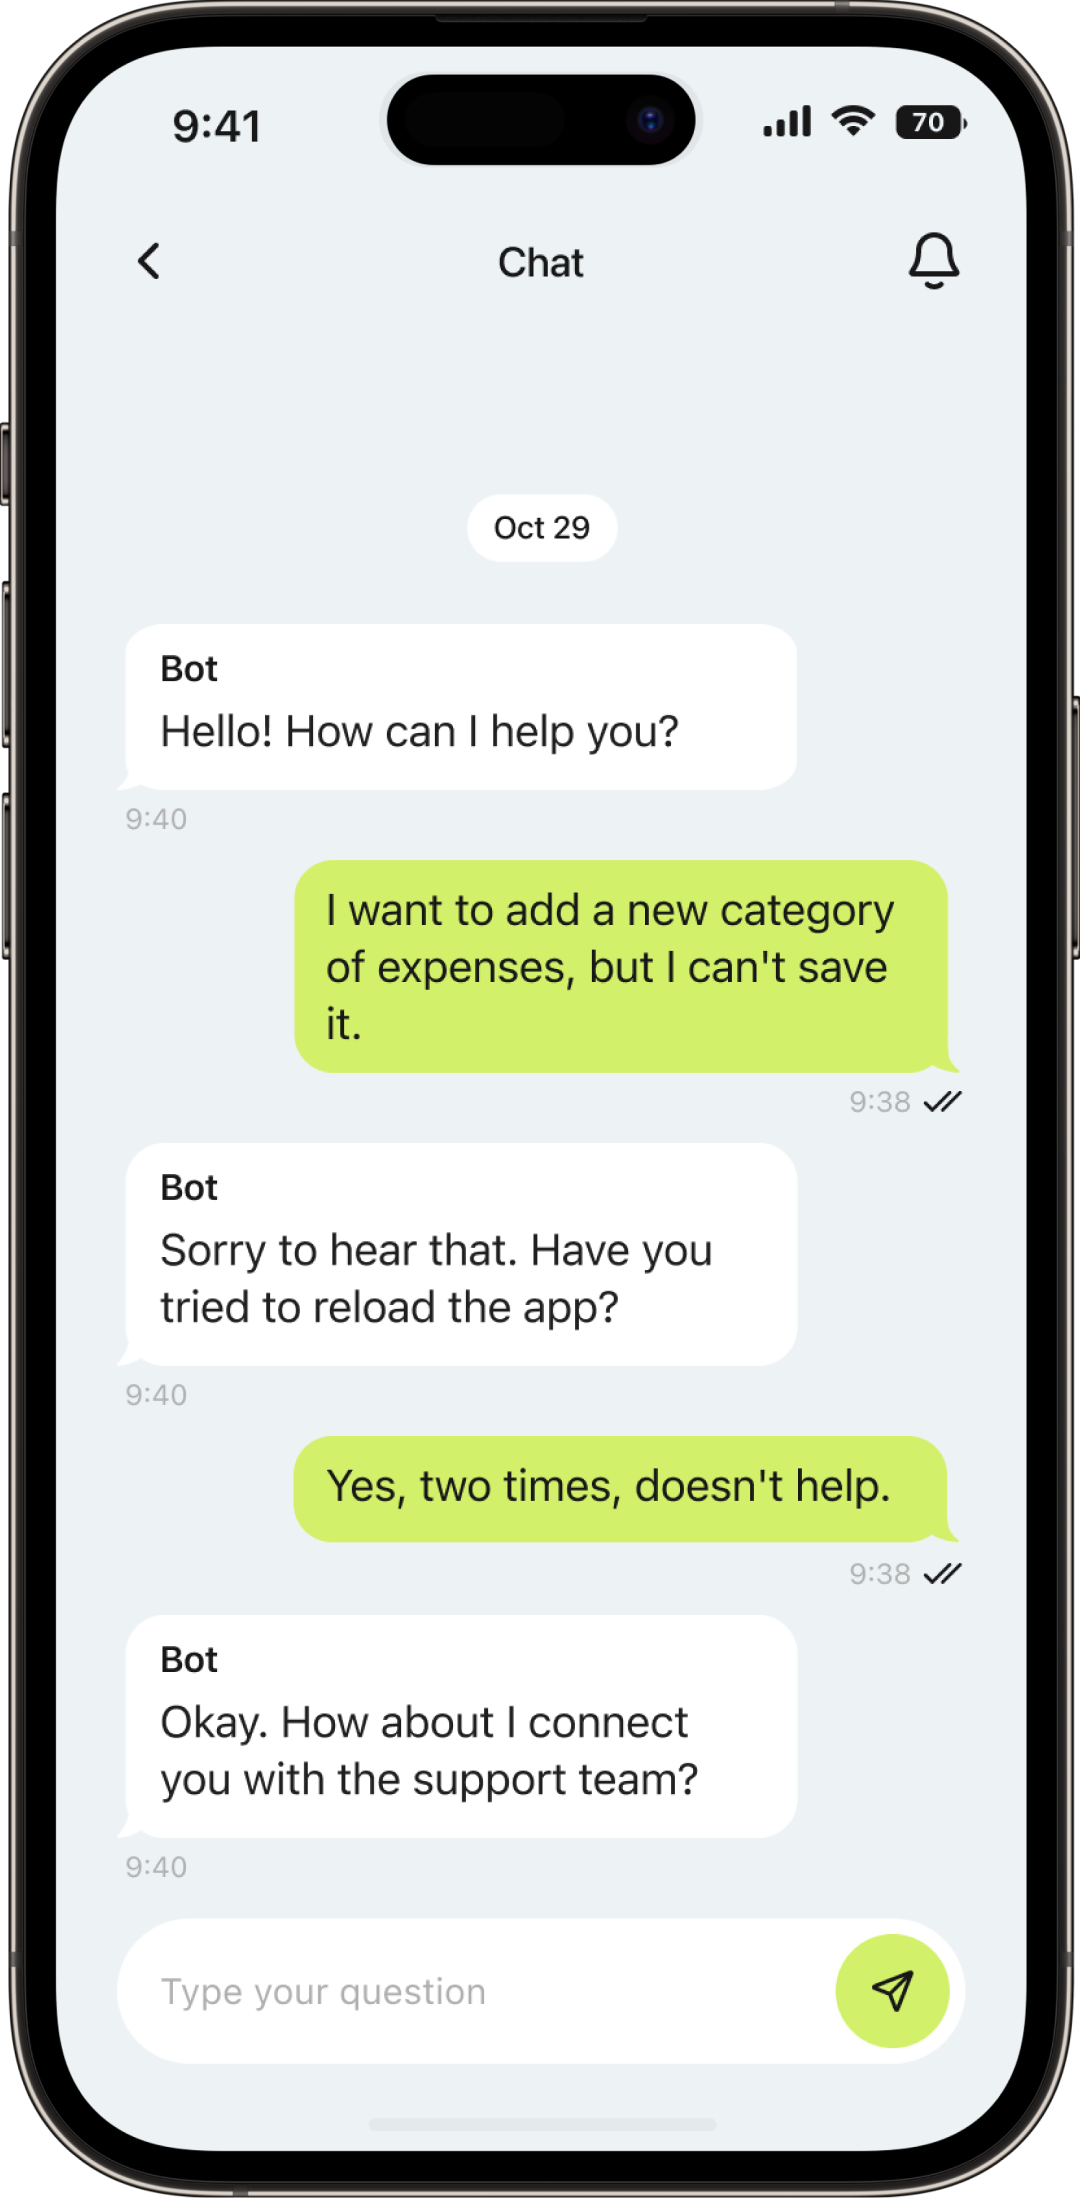 Chatbots Example